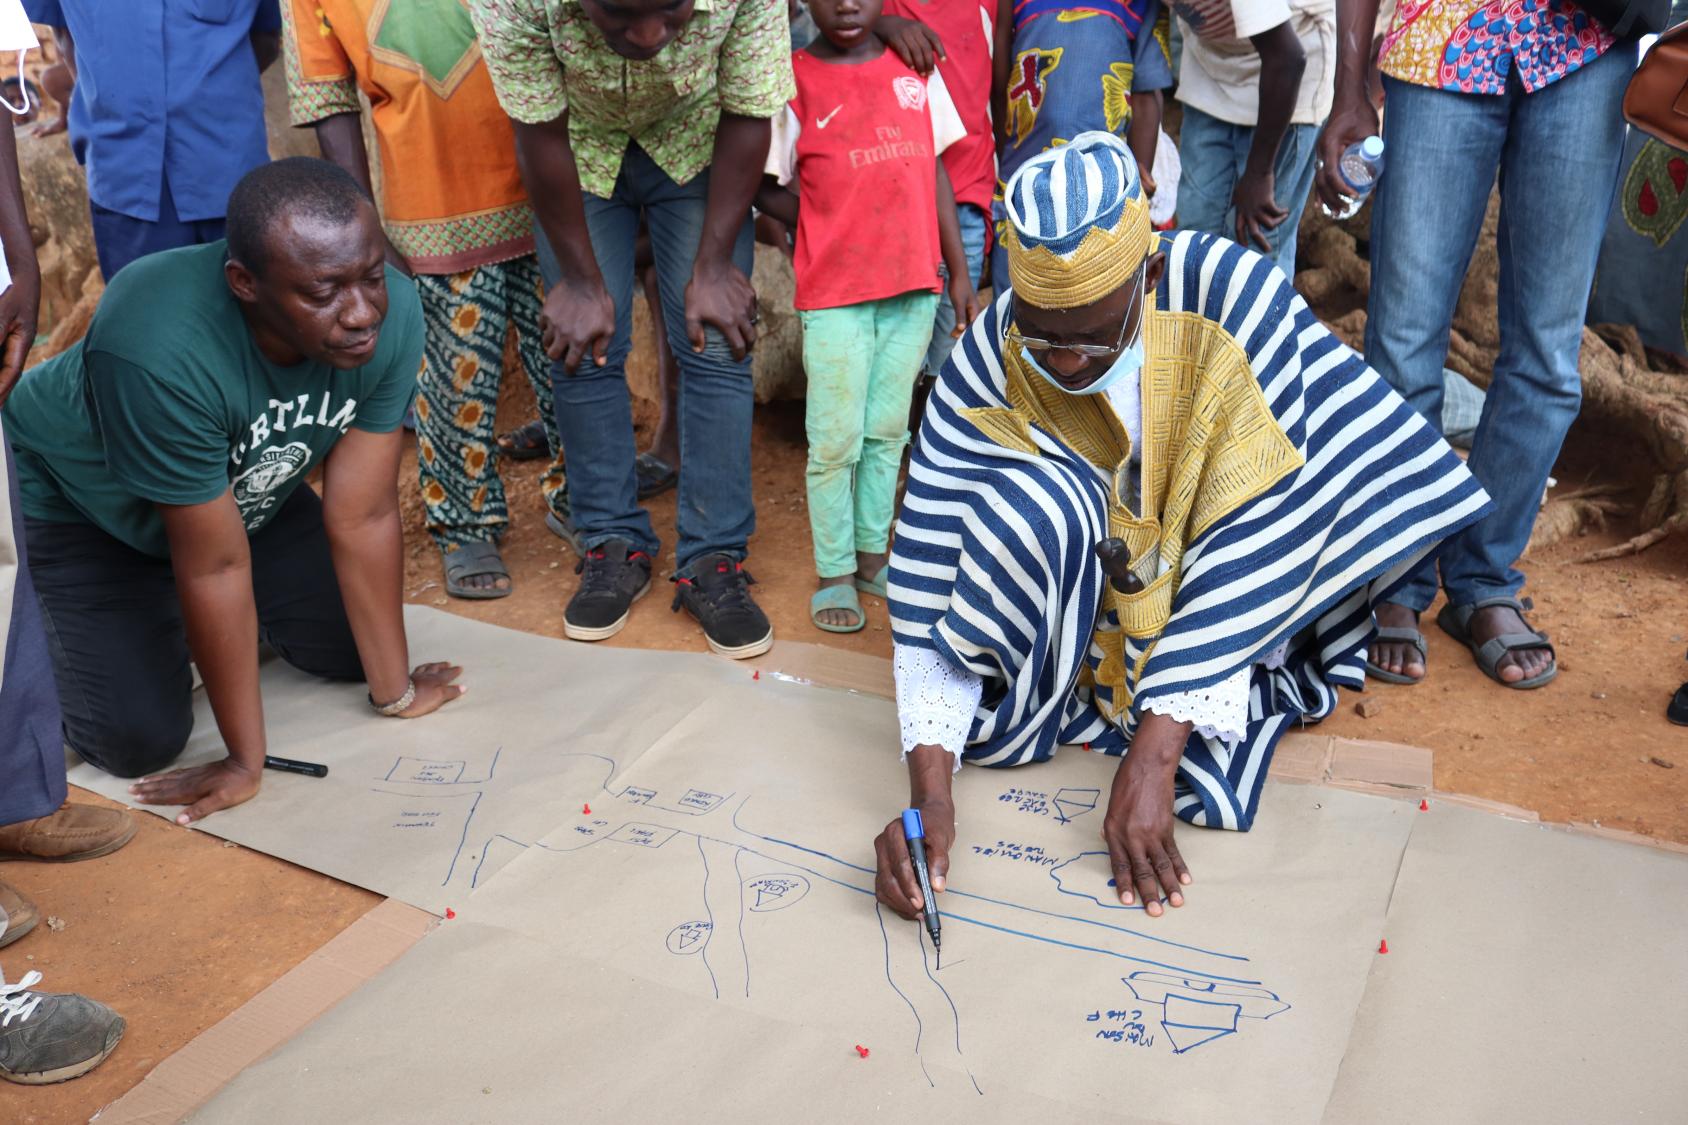 A man dressed in traditional Ivorian garb is crouched on the ground, surrounded by several people, carrying out an inventory on a large sheet of paper.